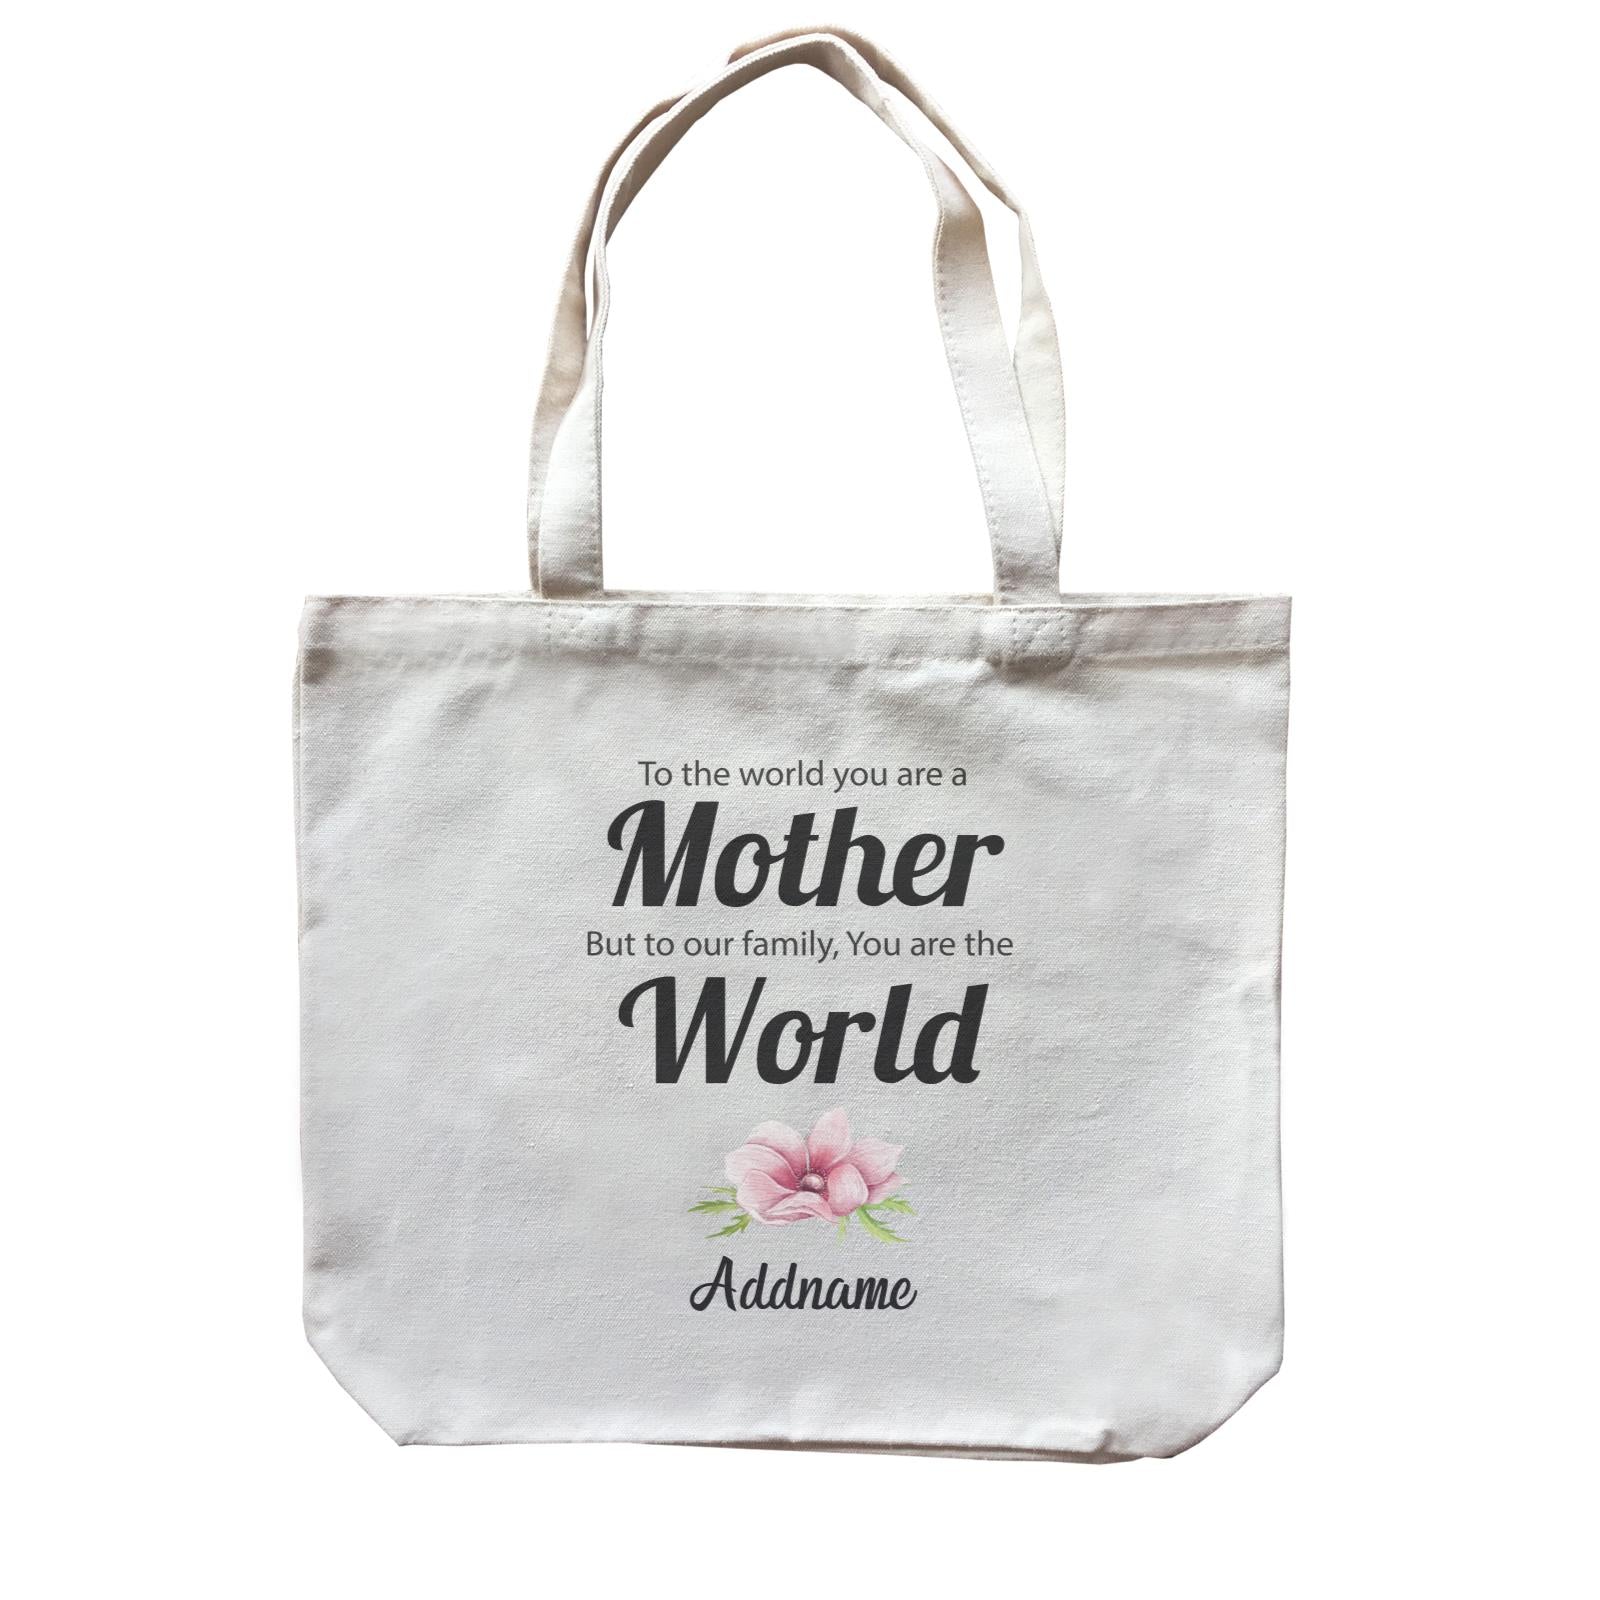 Sweet Mom Quotes 1 To The World You Are A Mother But To Our Family, You Are The World Addname Canvas Bag